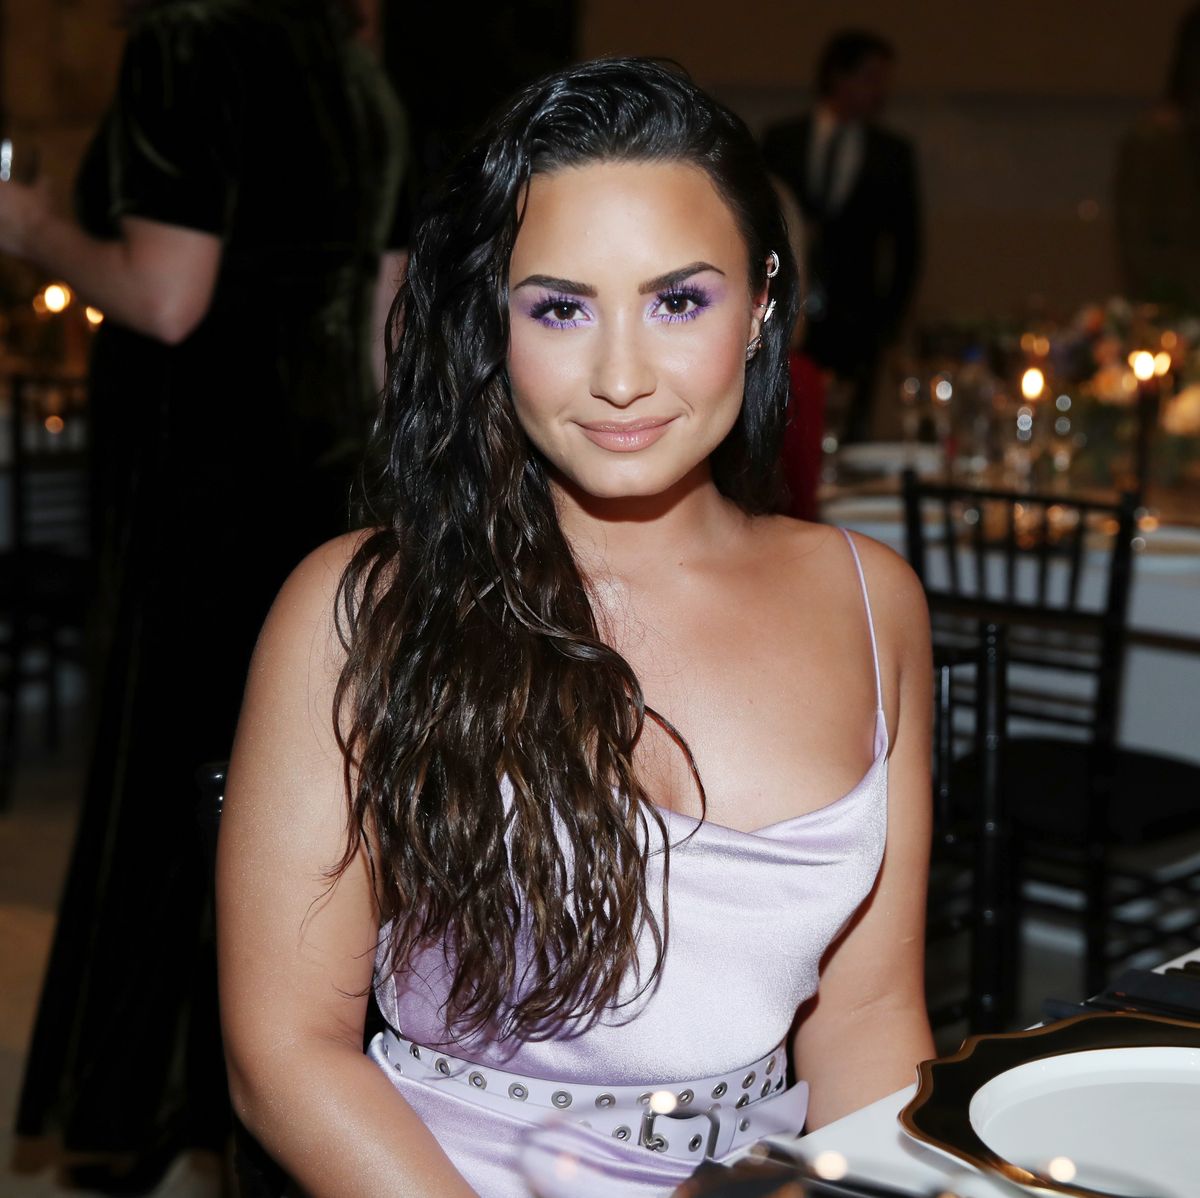 FIJI Water At The 2017 InStyle Awards